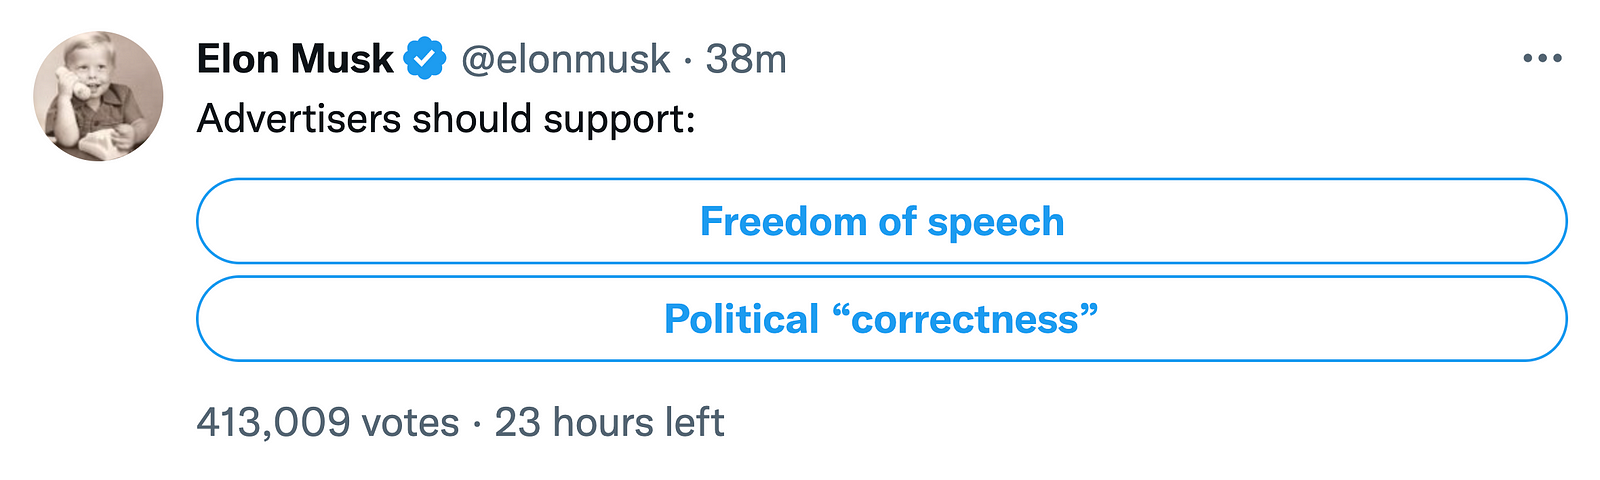 Screen shot of tweet pull asking whether advertisers should support “Freedom of speech” or “Political Correctness.”